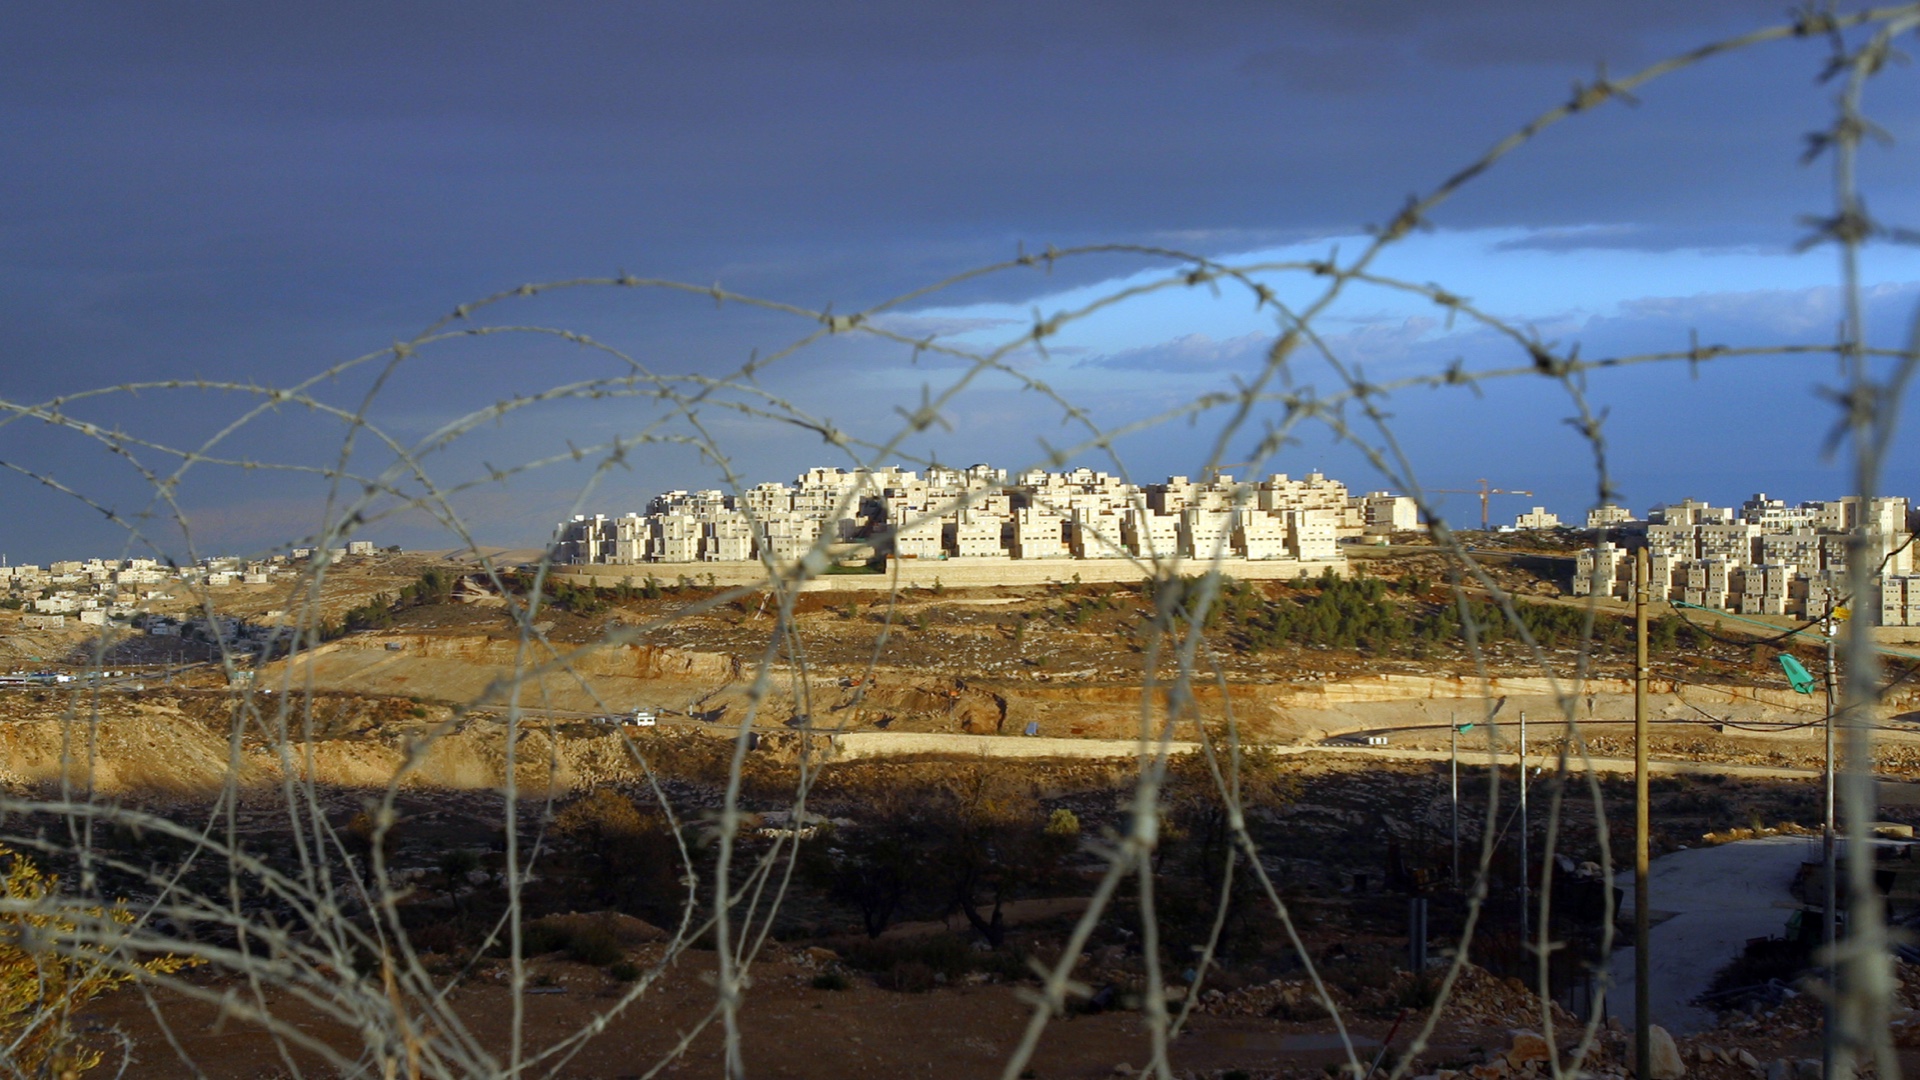 As annexation looms, no one is ready to hold Israel accountable